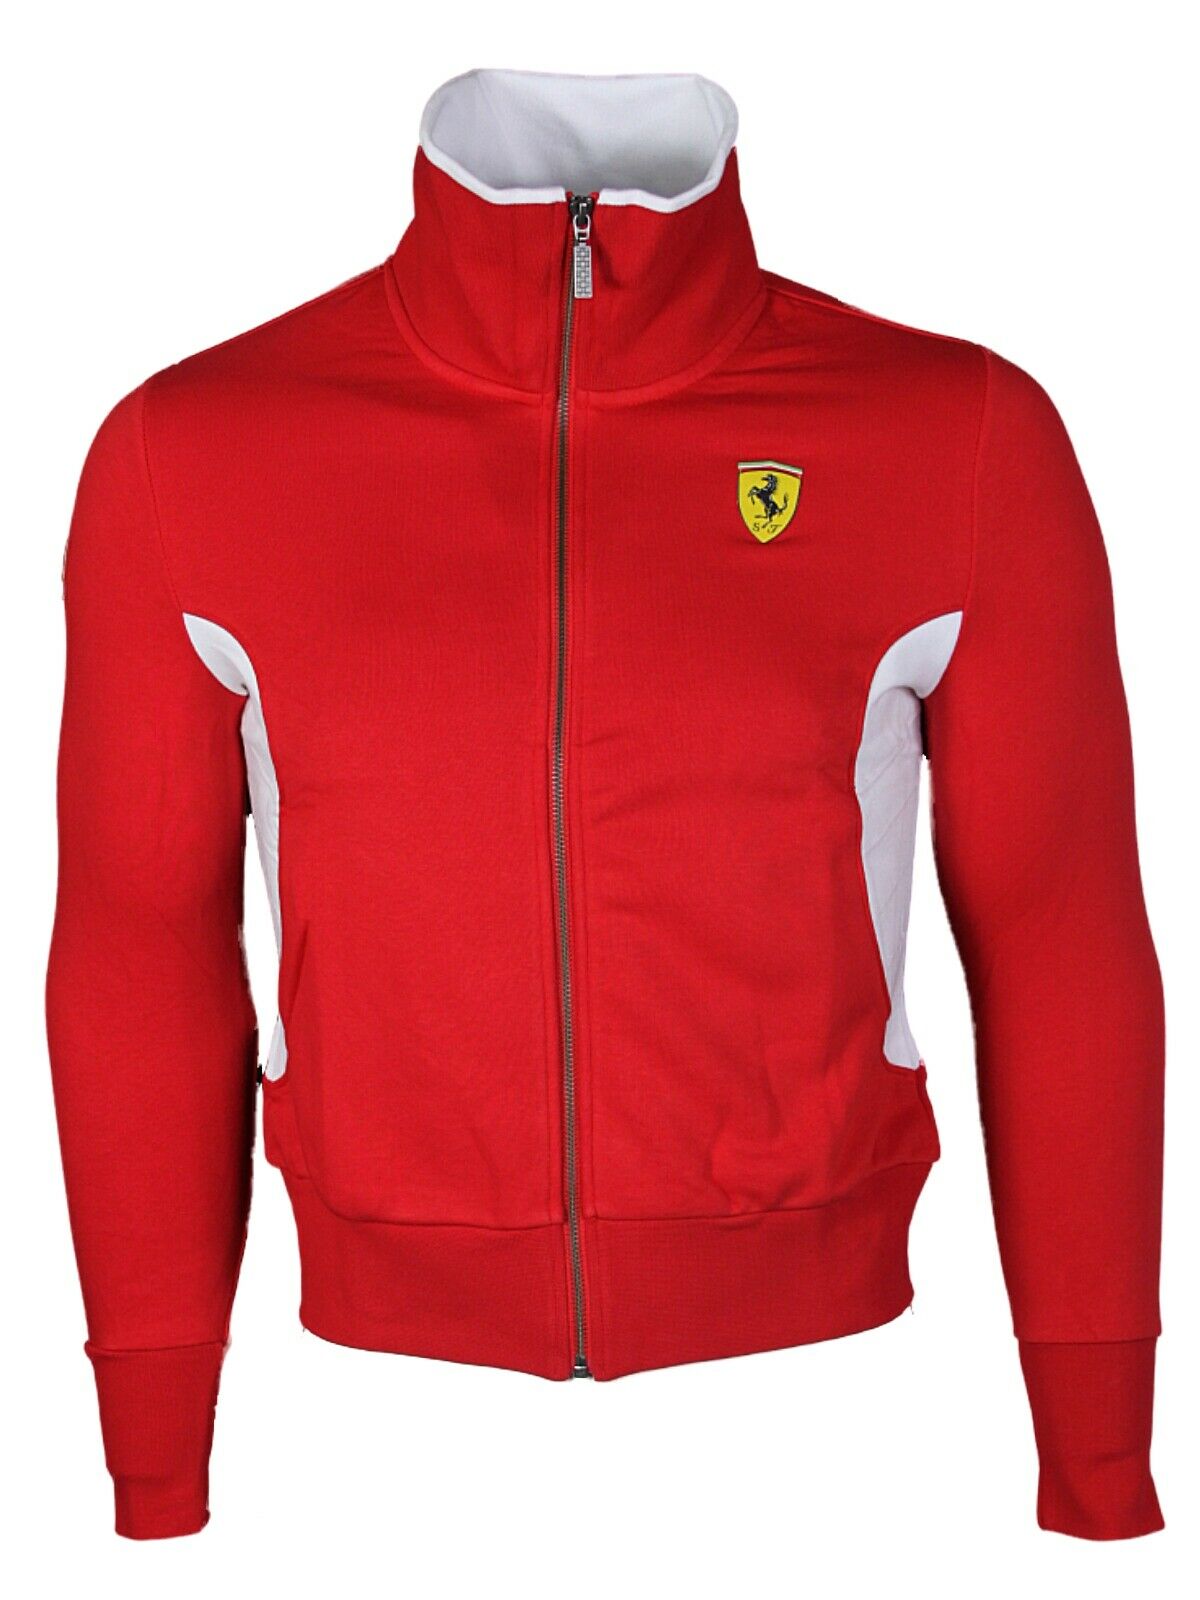 Ferrari Womens Red Jackets Zip Up Fitted Lightweight Casual Ladies ...